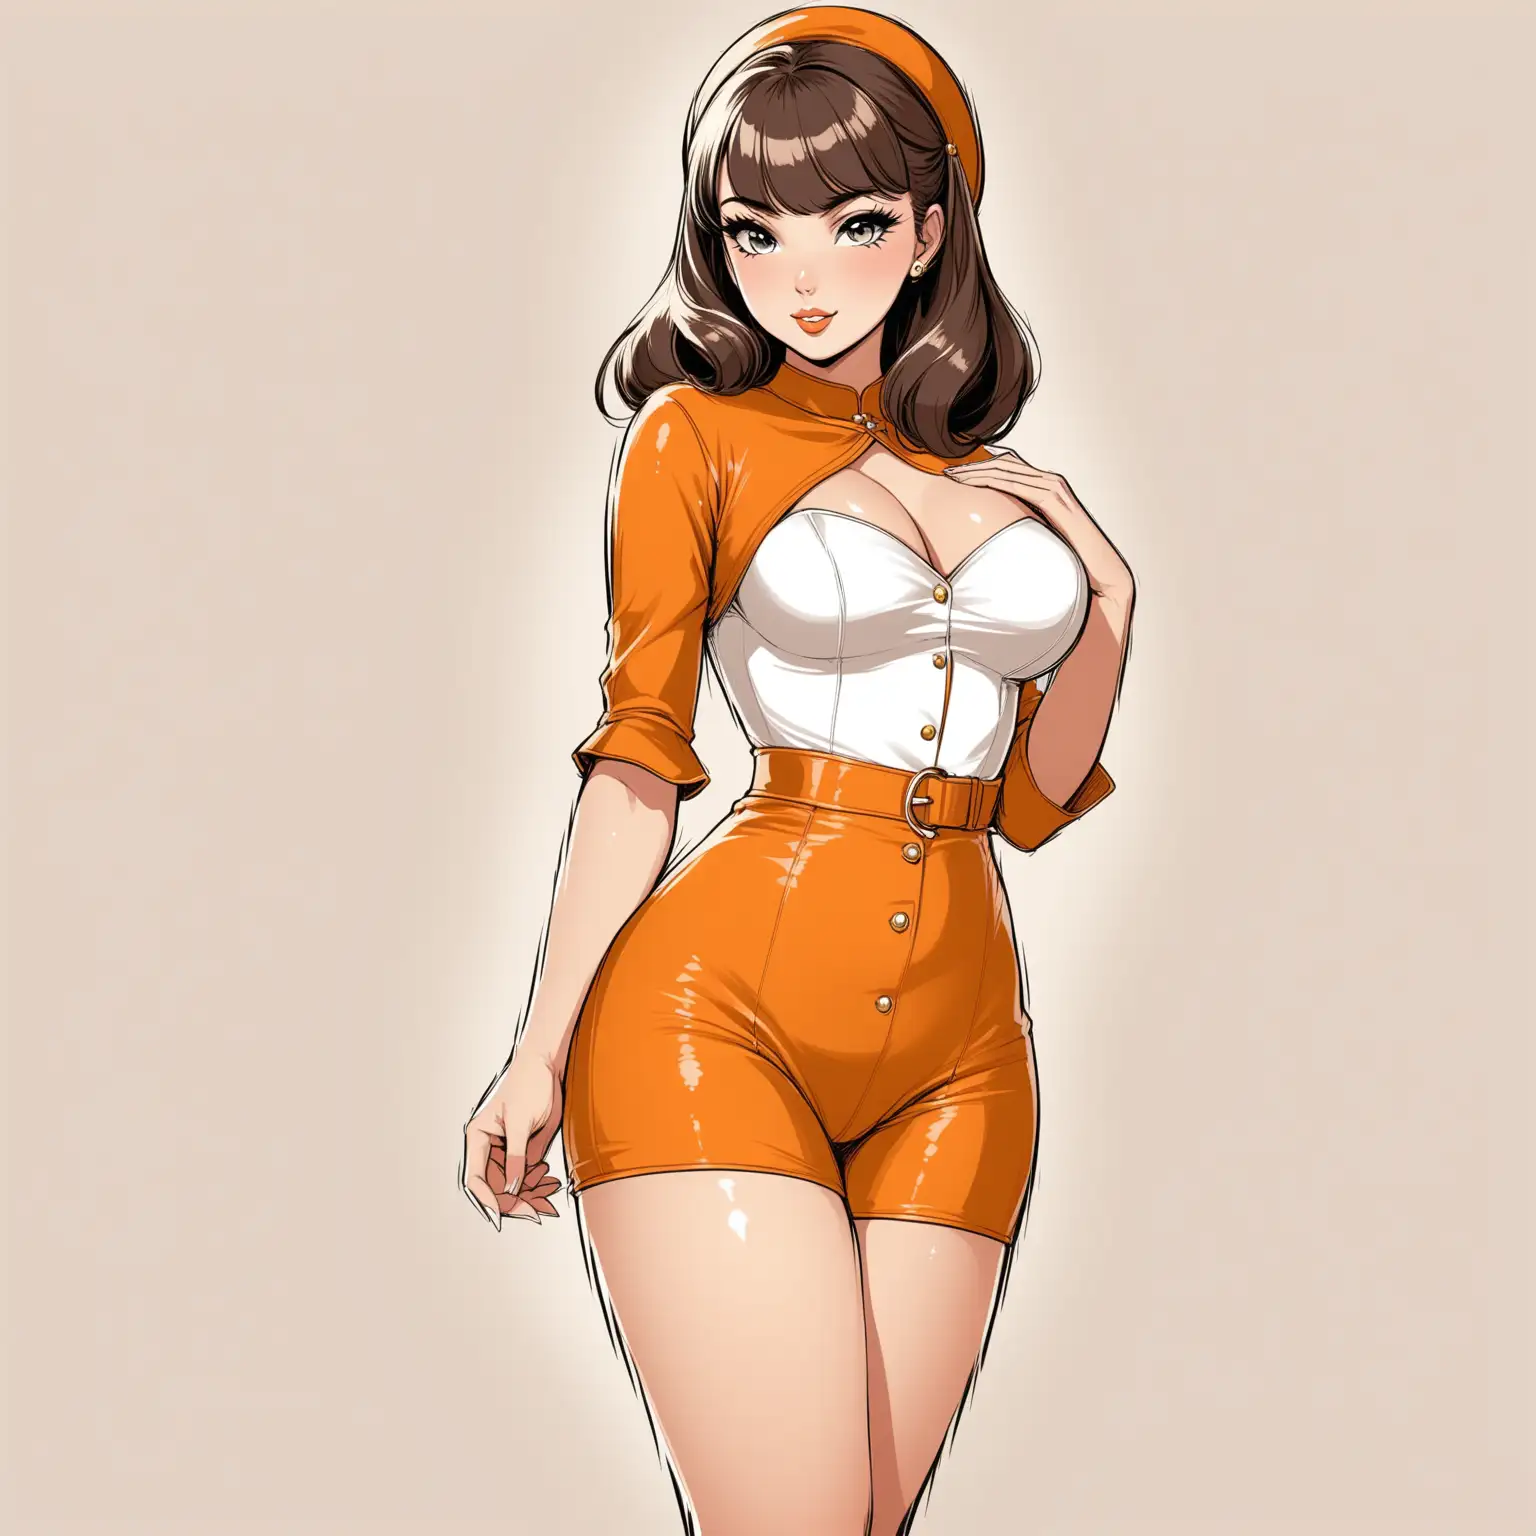 Seductive 60s Style Waifu in a Stunning Outfit with Emphasized Curves